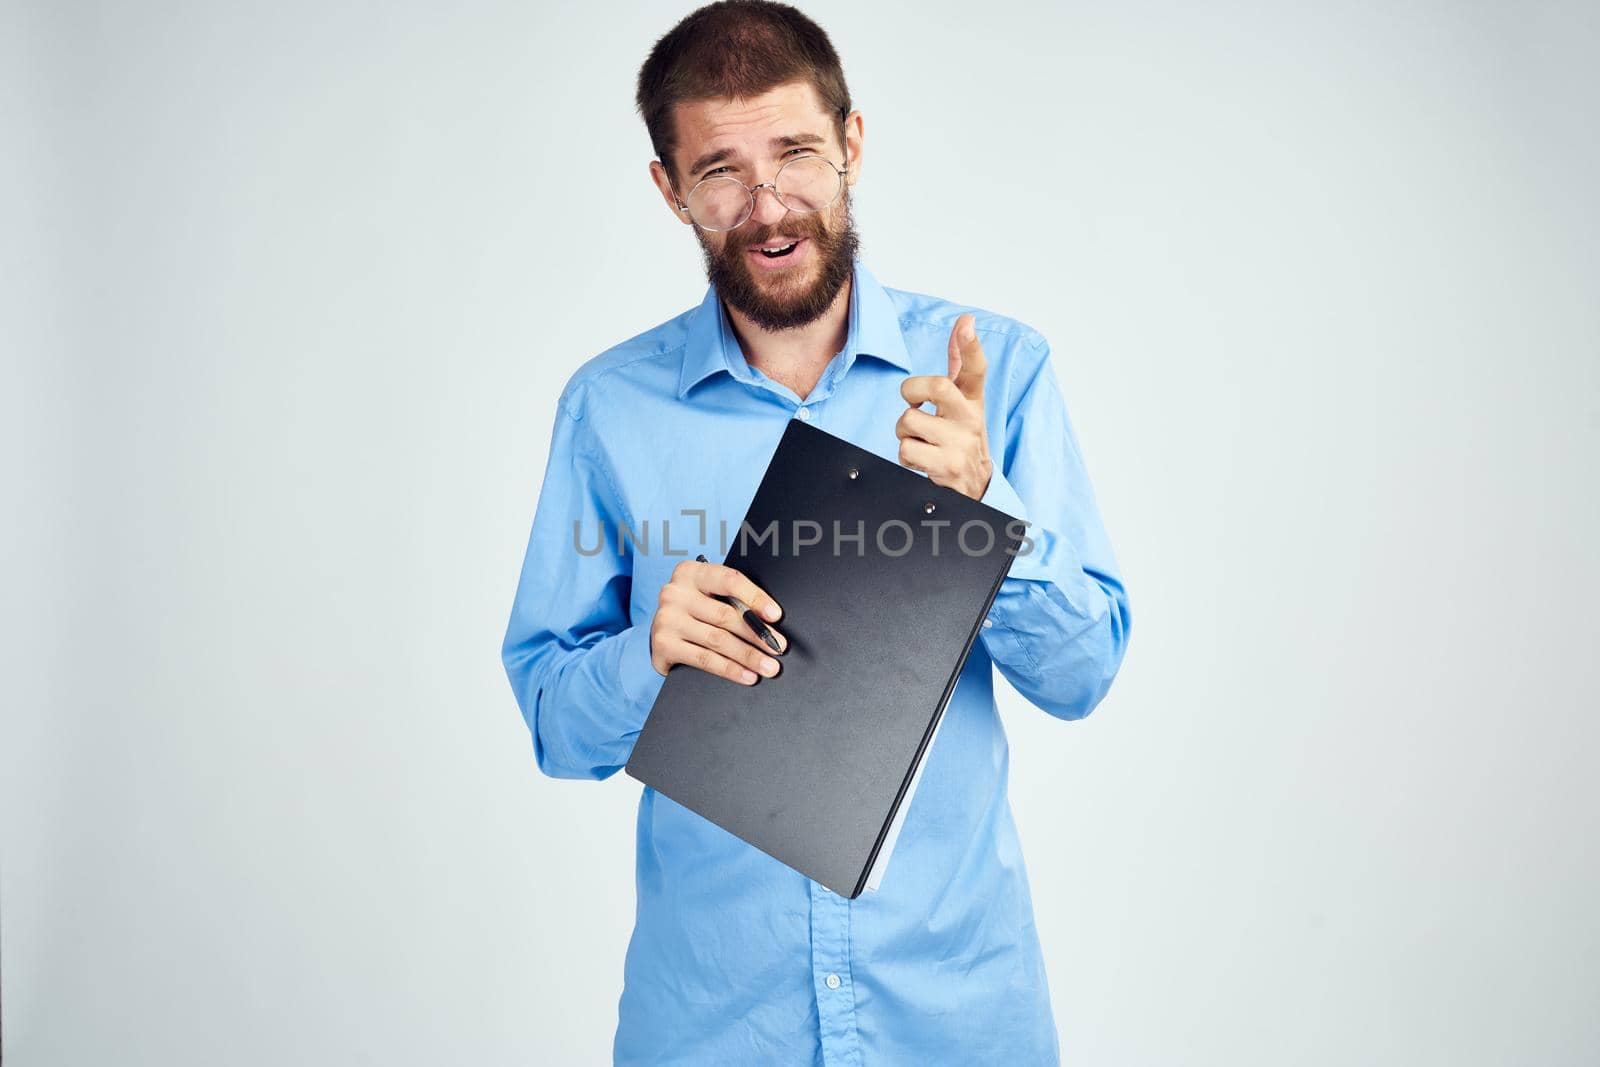 manager in blue shirt wearing glasses success emotions Professional by Vichizh